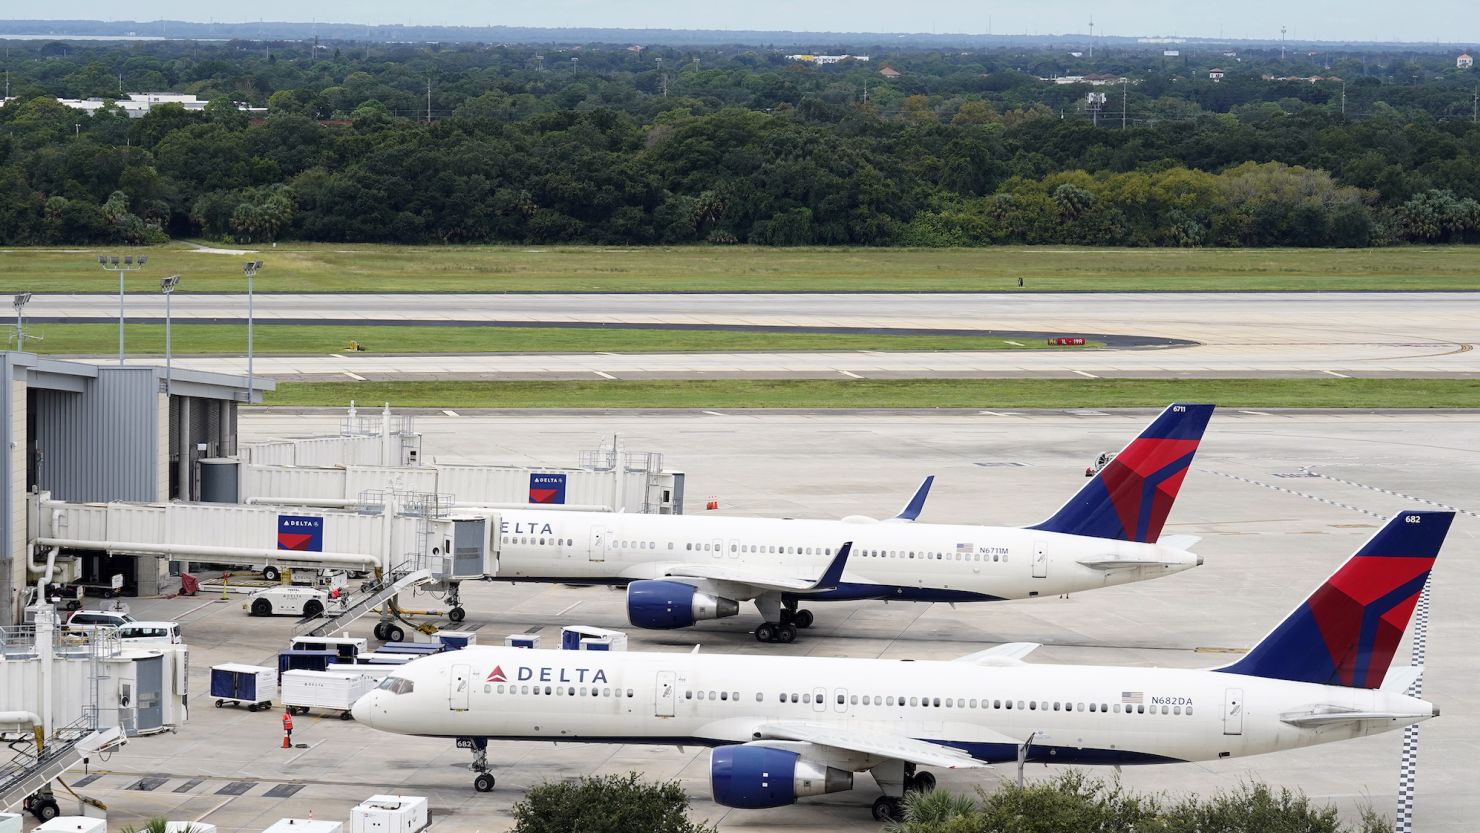 A Delta Airlines Boeing 757 pushes back from the gate at the Tampa International Airport Tuesday, Sept. 27, 2022, in Tampa, Fla. The airport is closing at 5pm today ahead of a potential landfall by Hurricane Ian. Ian is predicted to hit somewhere along Florida's west coast. (AP Photo/Chris O'Meara)